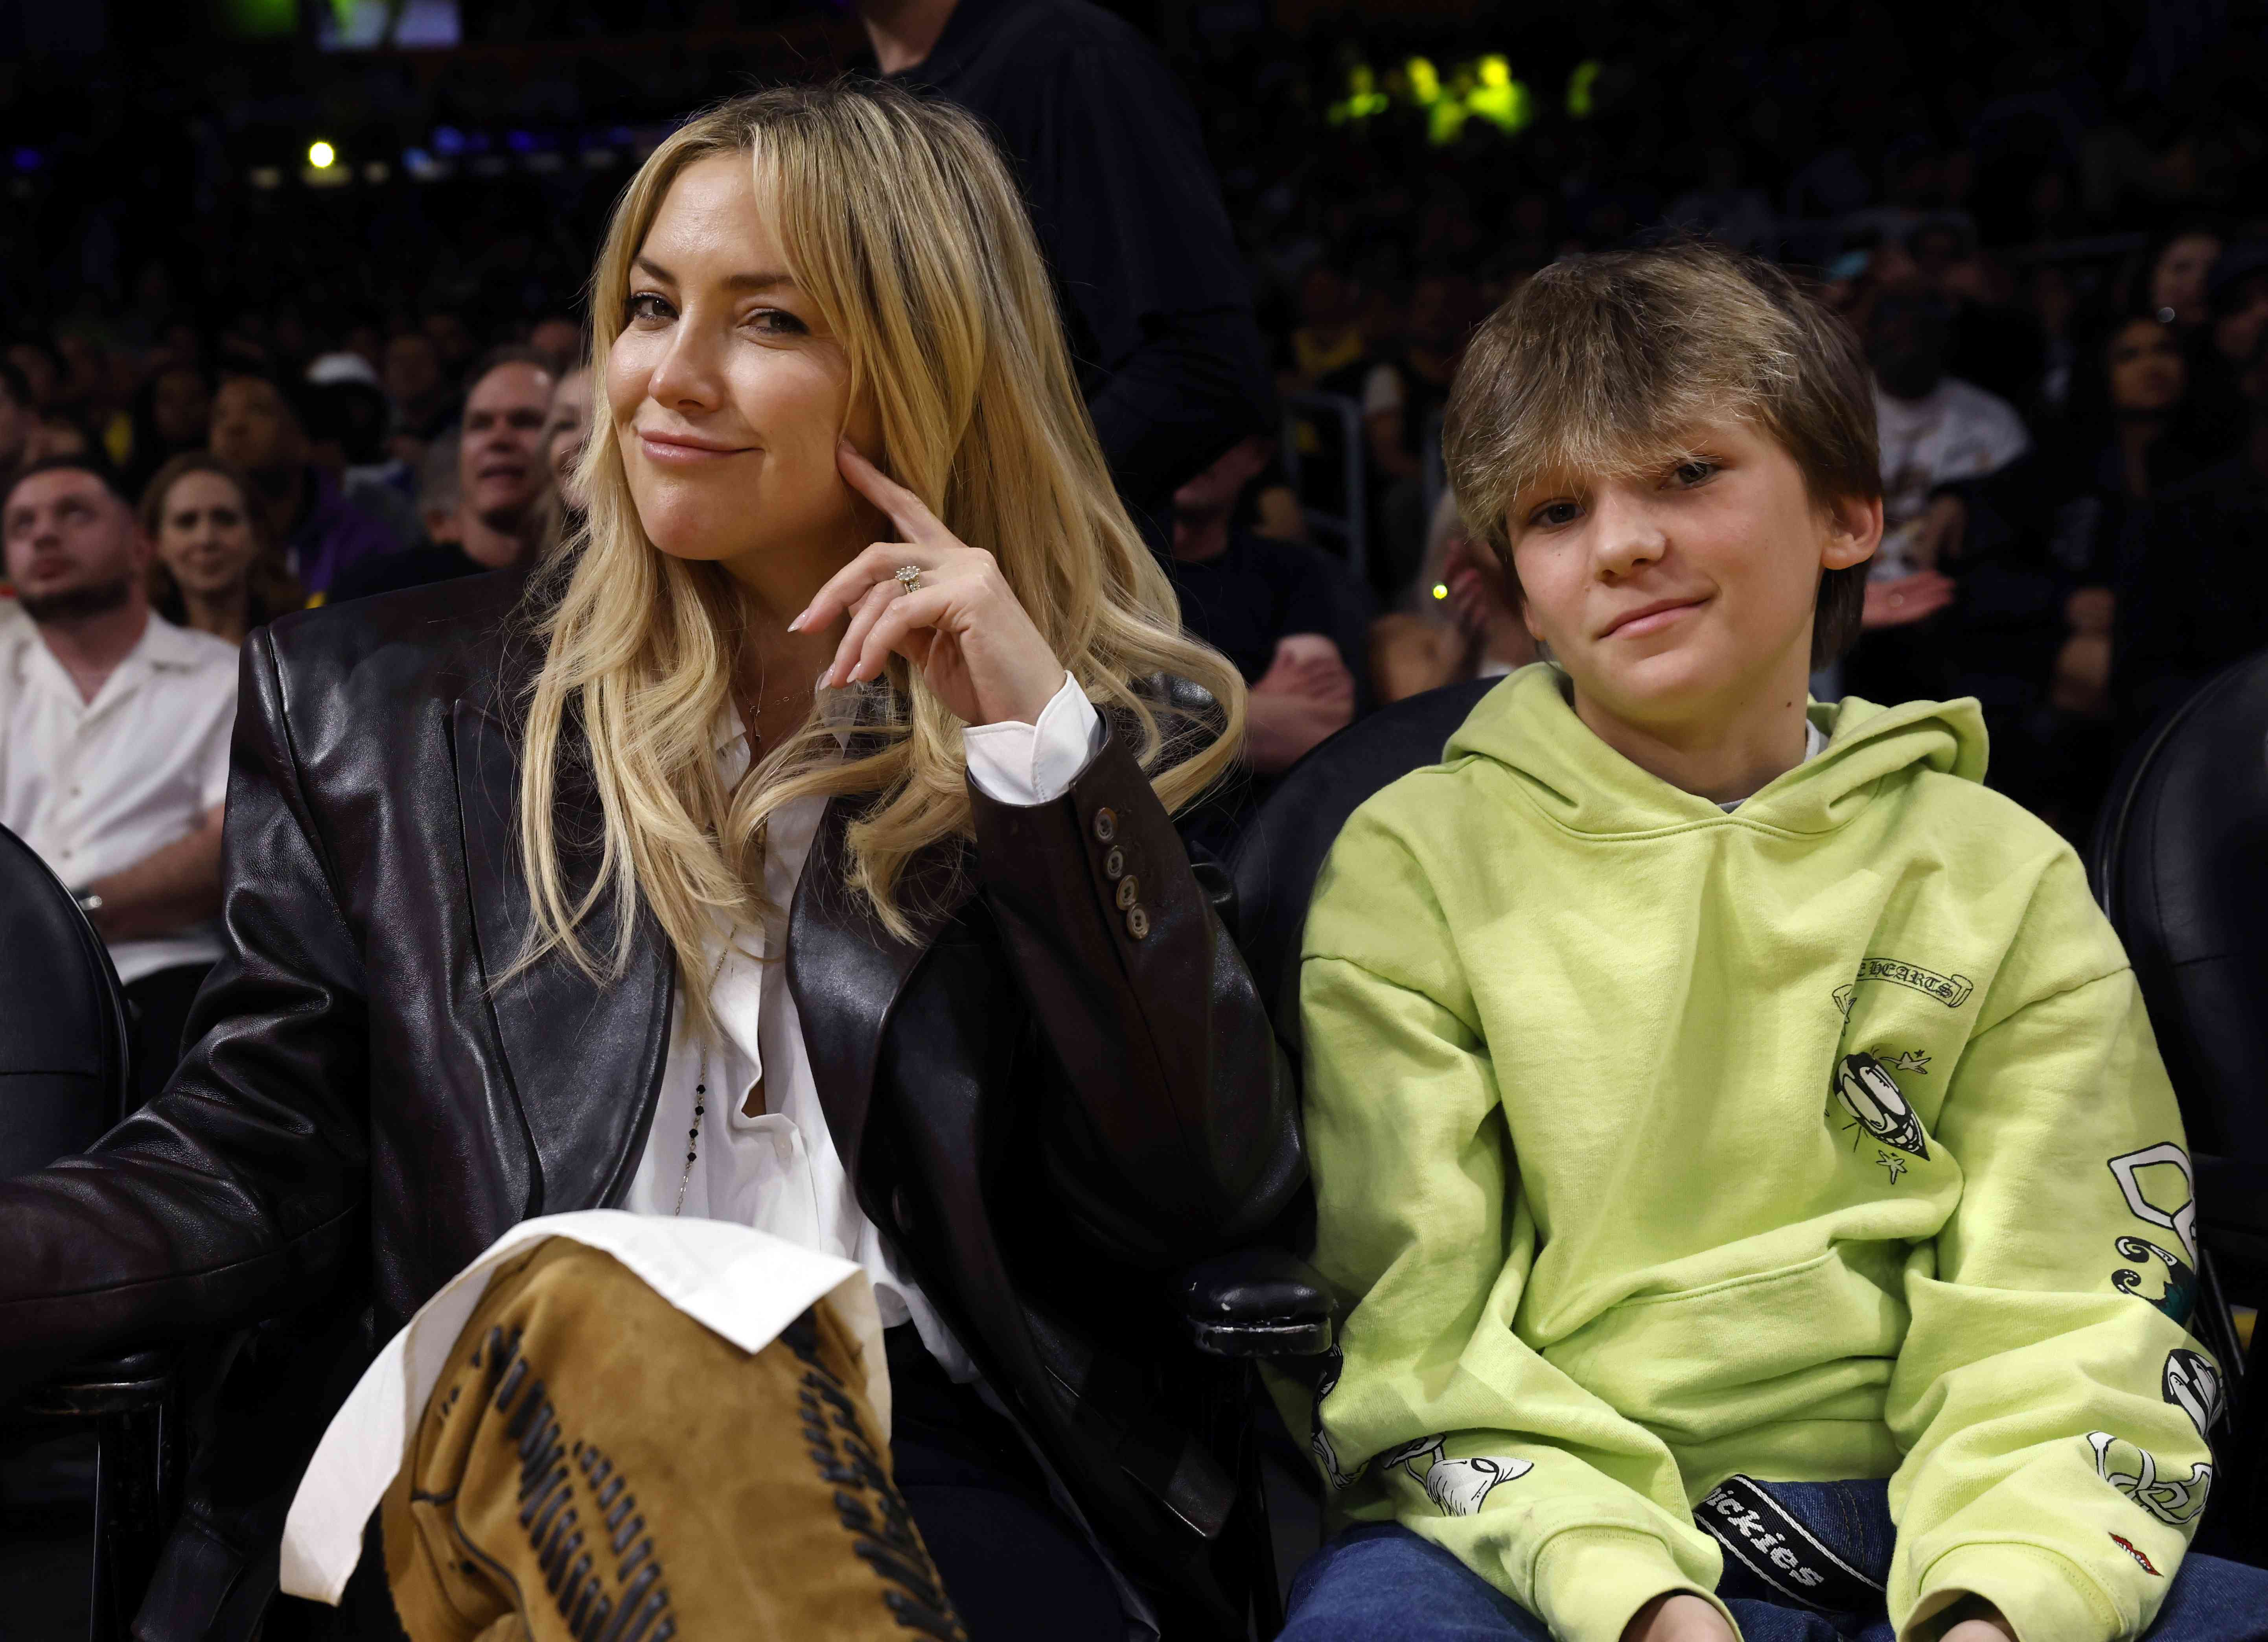 Kate Hudson Reveals Her Son Bingham, 12, Is ‘Really into the Stock Market,’ Trades His Own Bonds (Exclusive)